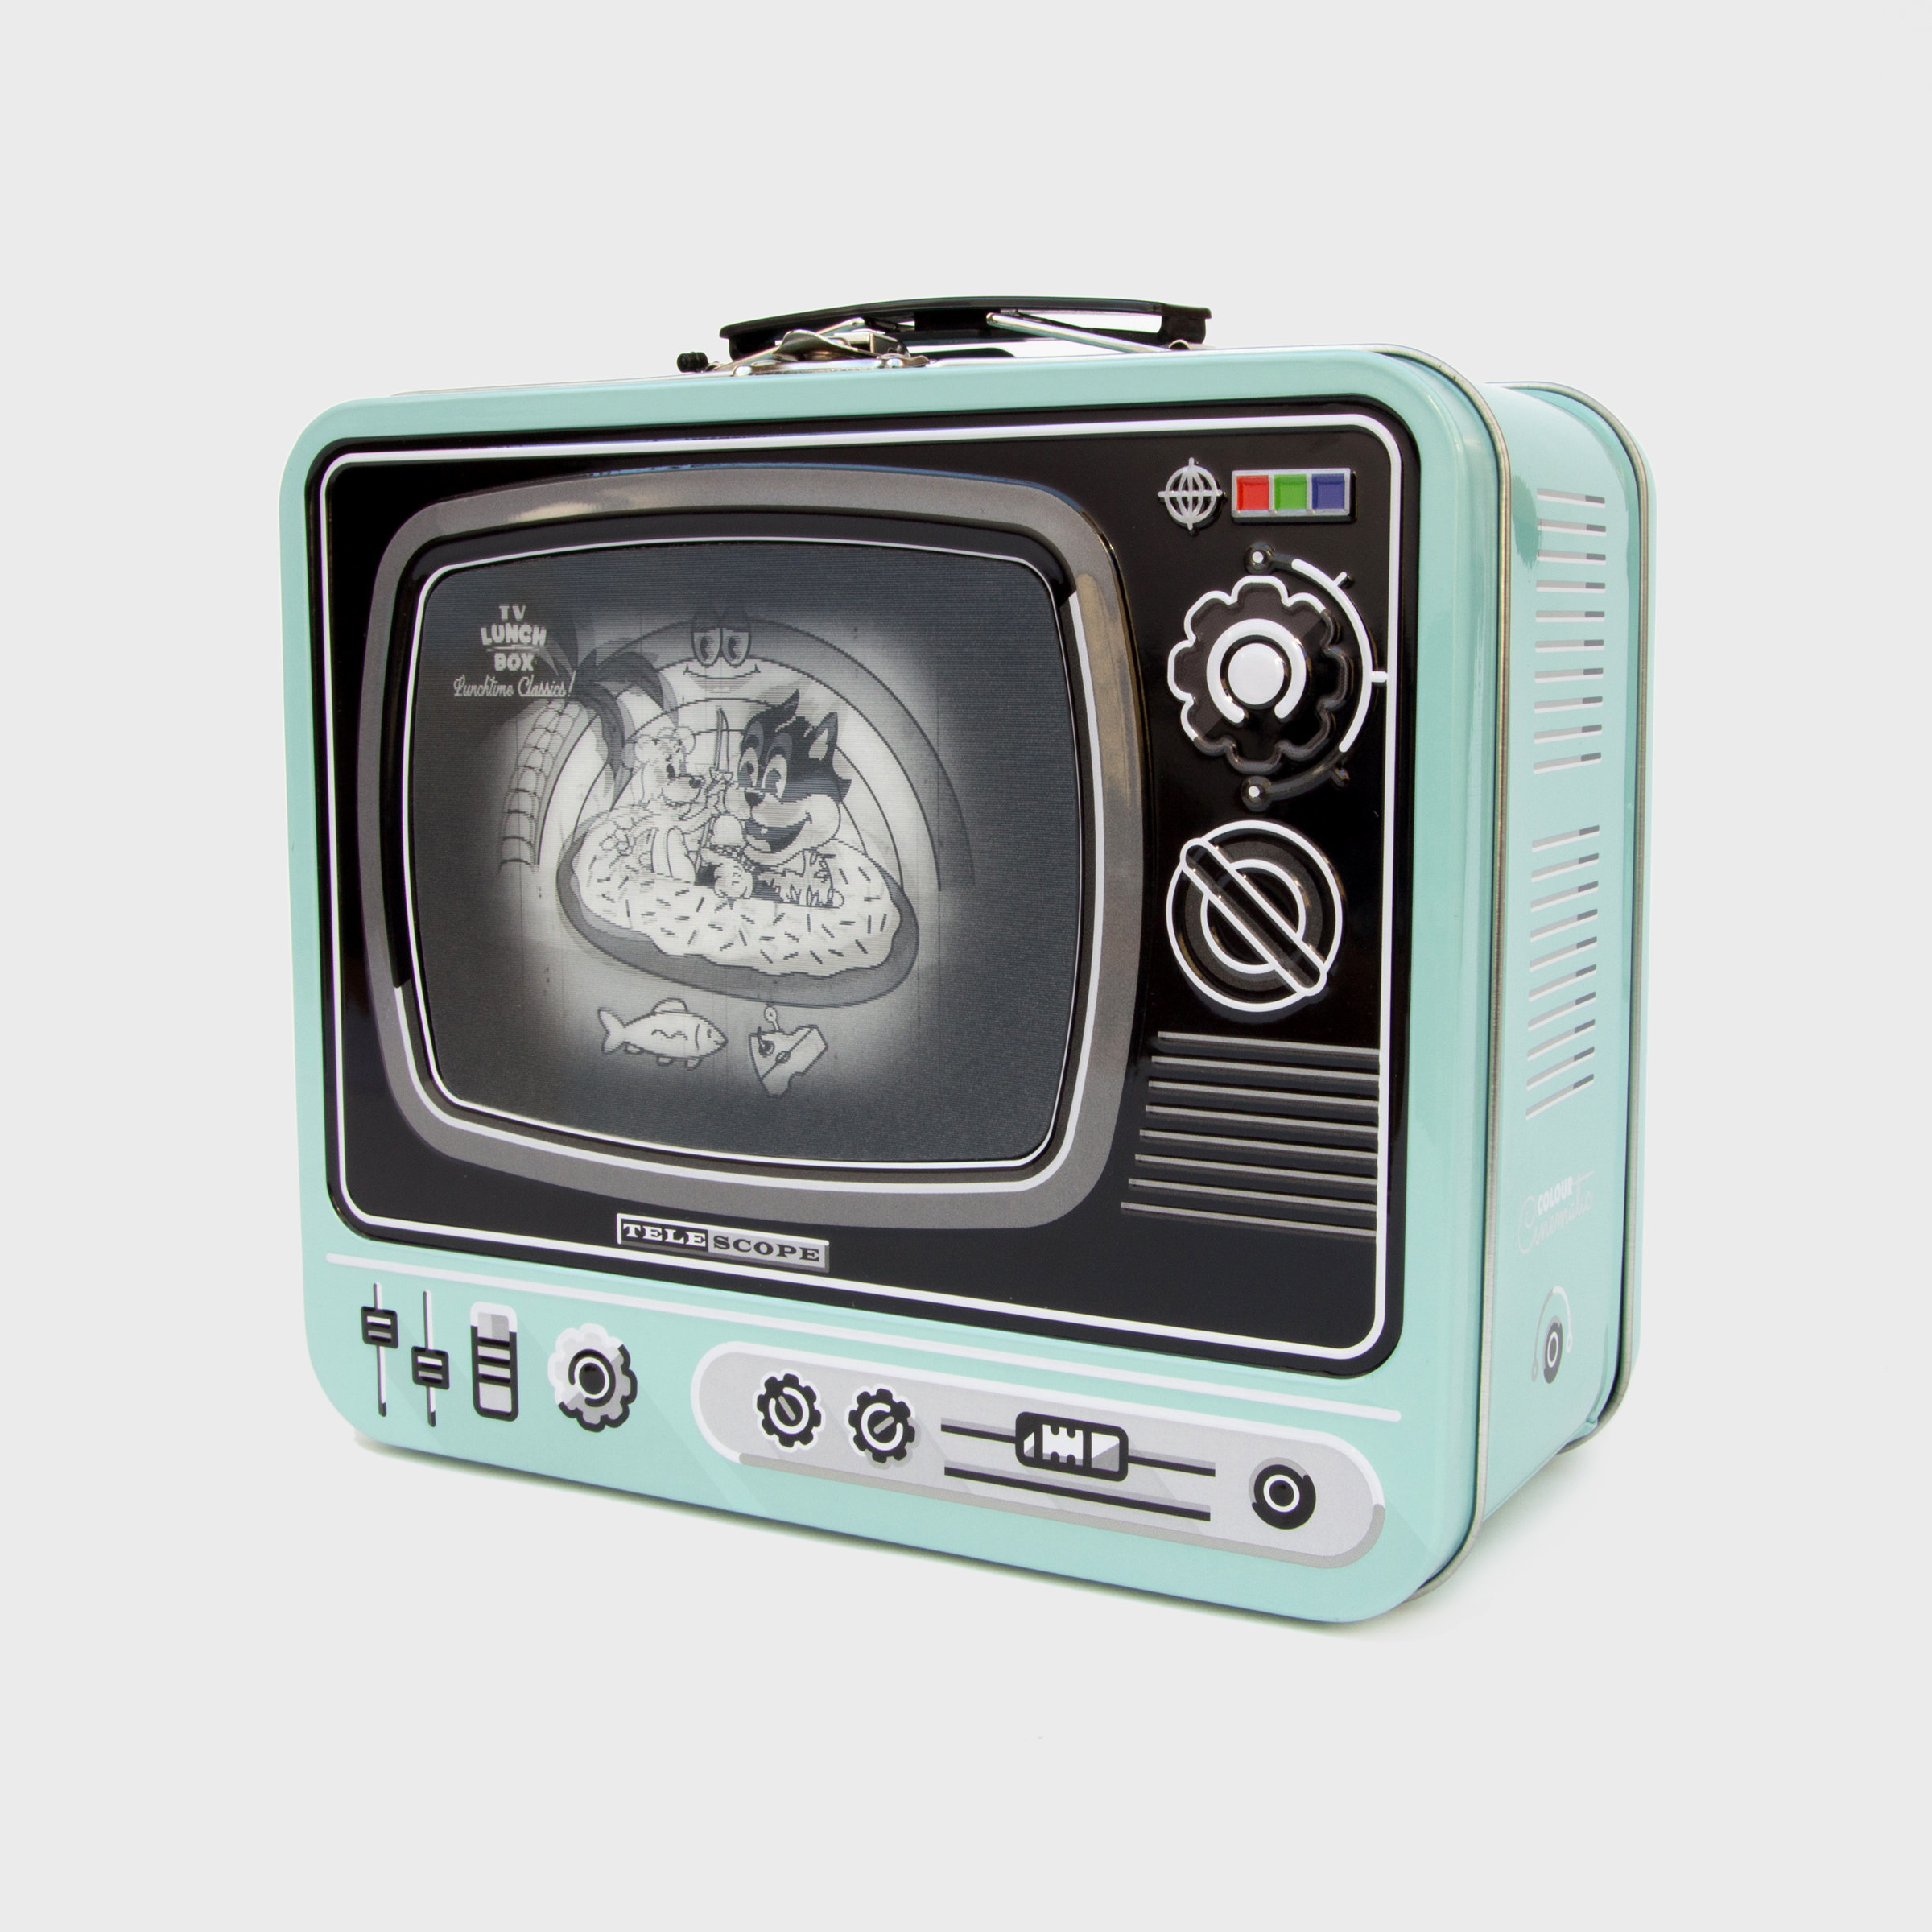 Tin TV lunchbox in blue with magic screen